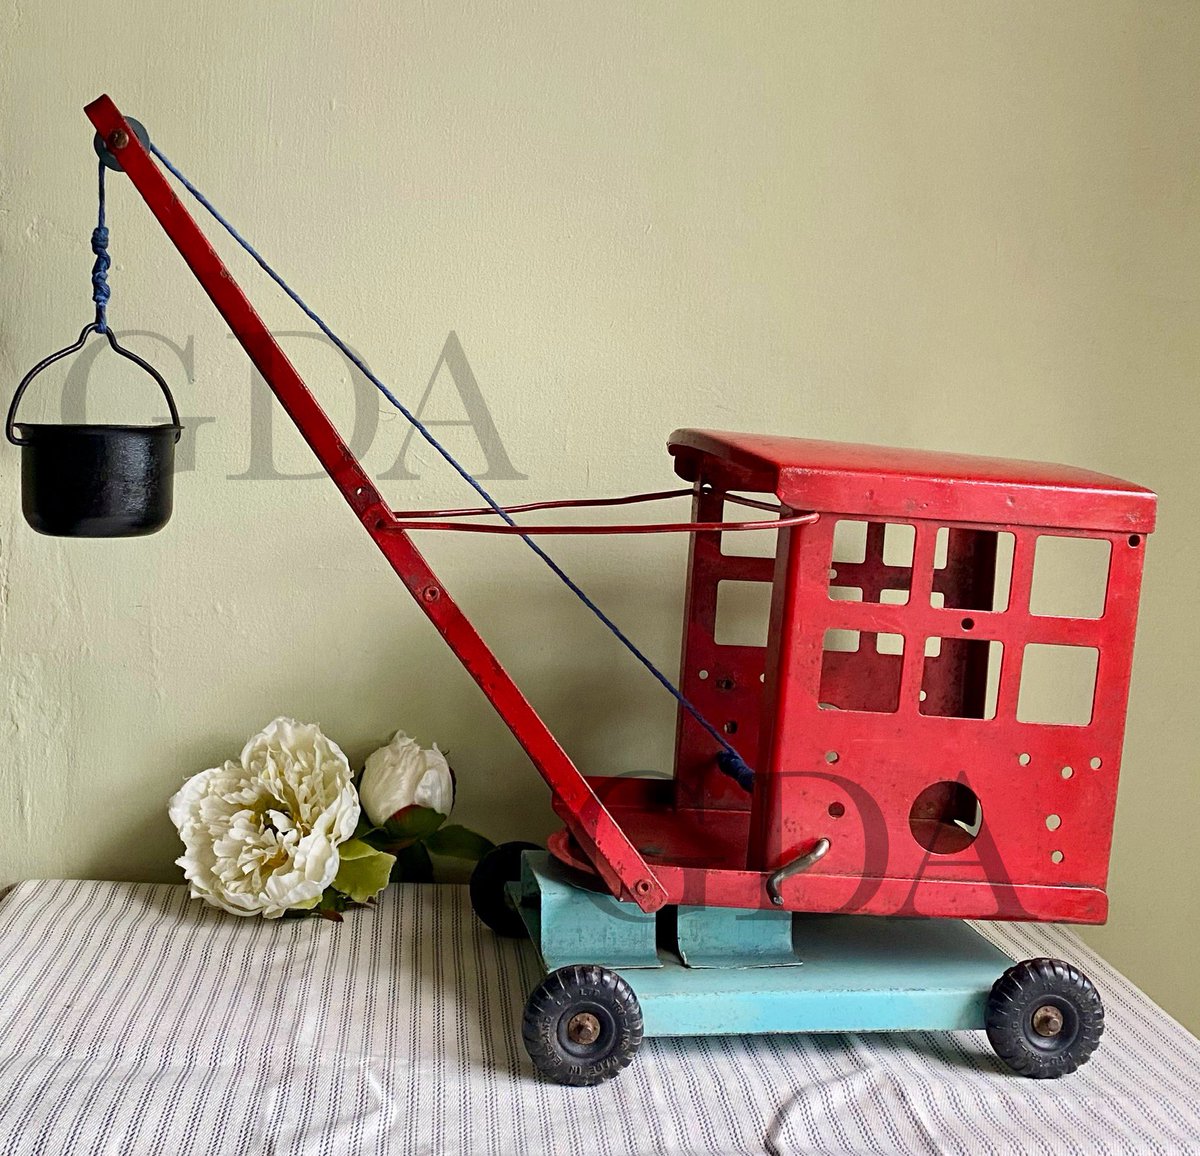 ♥️♥️♥️♥️♥️
1950s Tri-Ang working toy crane. 
See it and more at,
Dieudonneart.com/antiques

#earlybiz #elevenseshour #red #vintagetoys #toys #collectables #antiques #shopindie #uniquegifts #nostalgia #bizhour